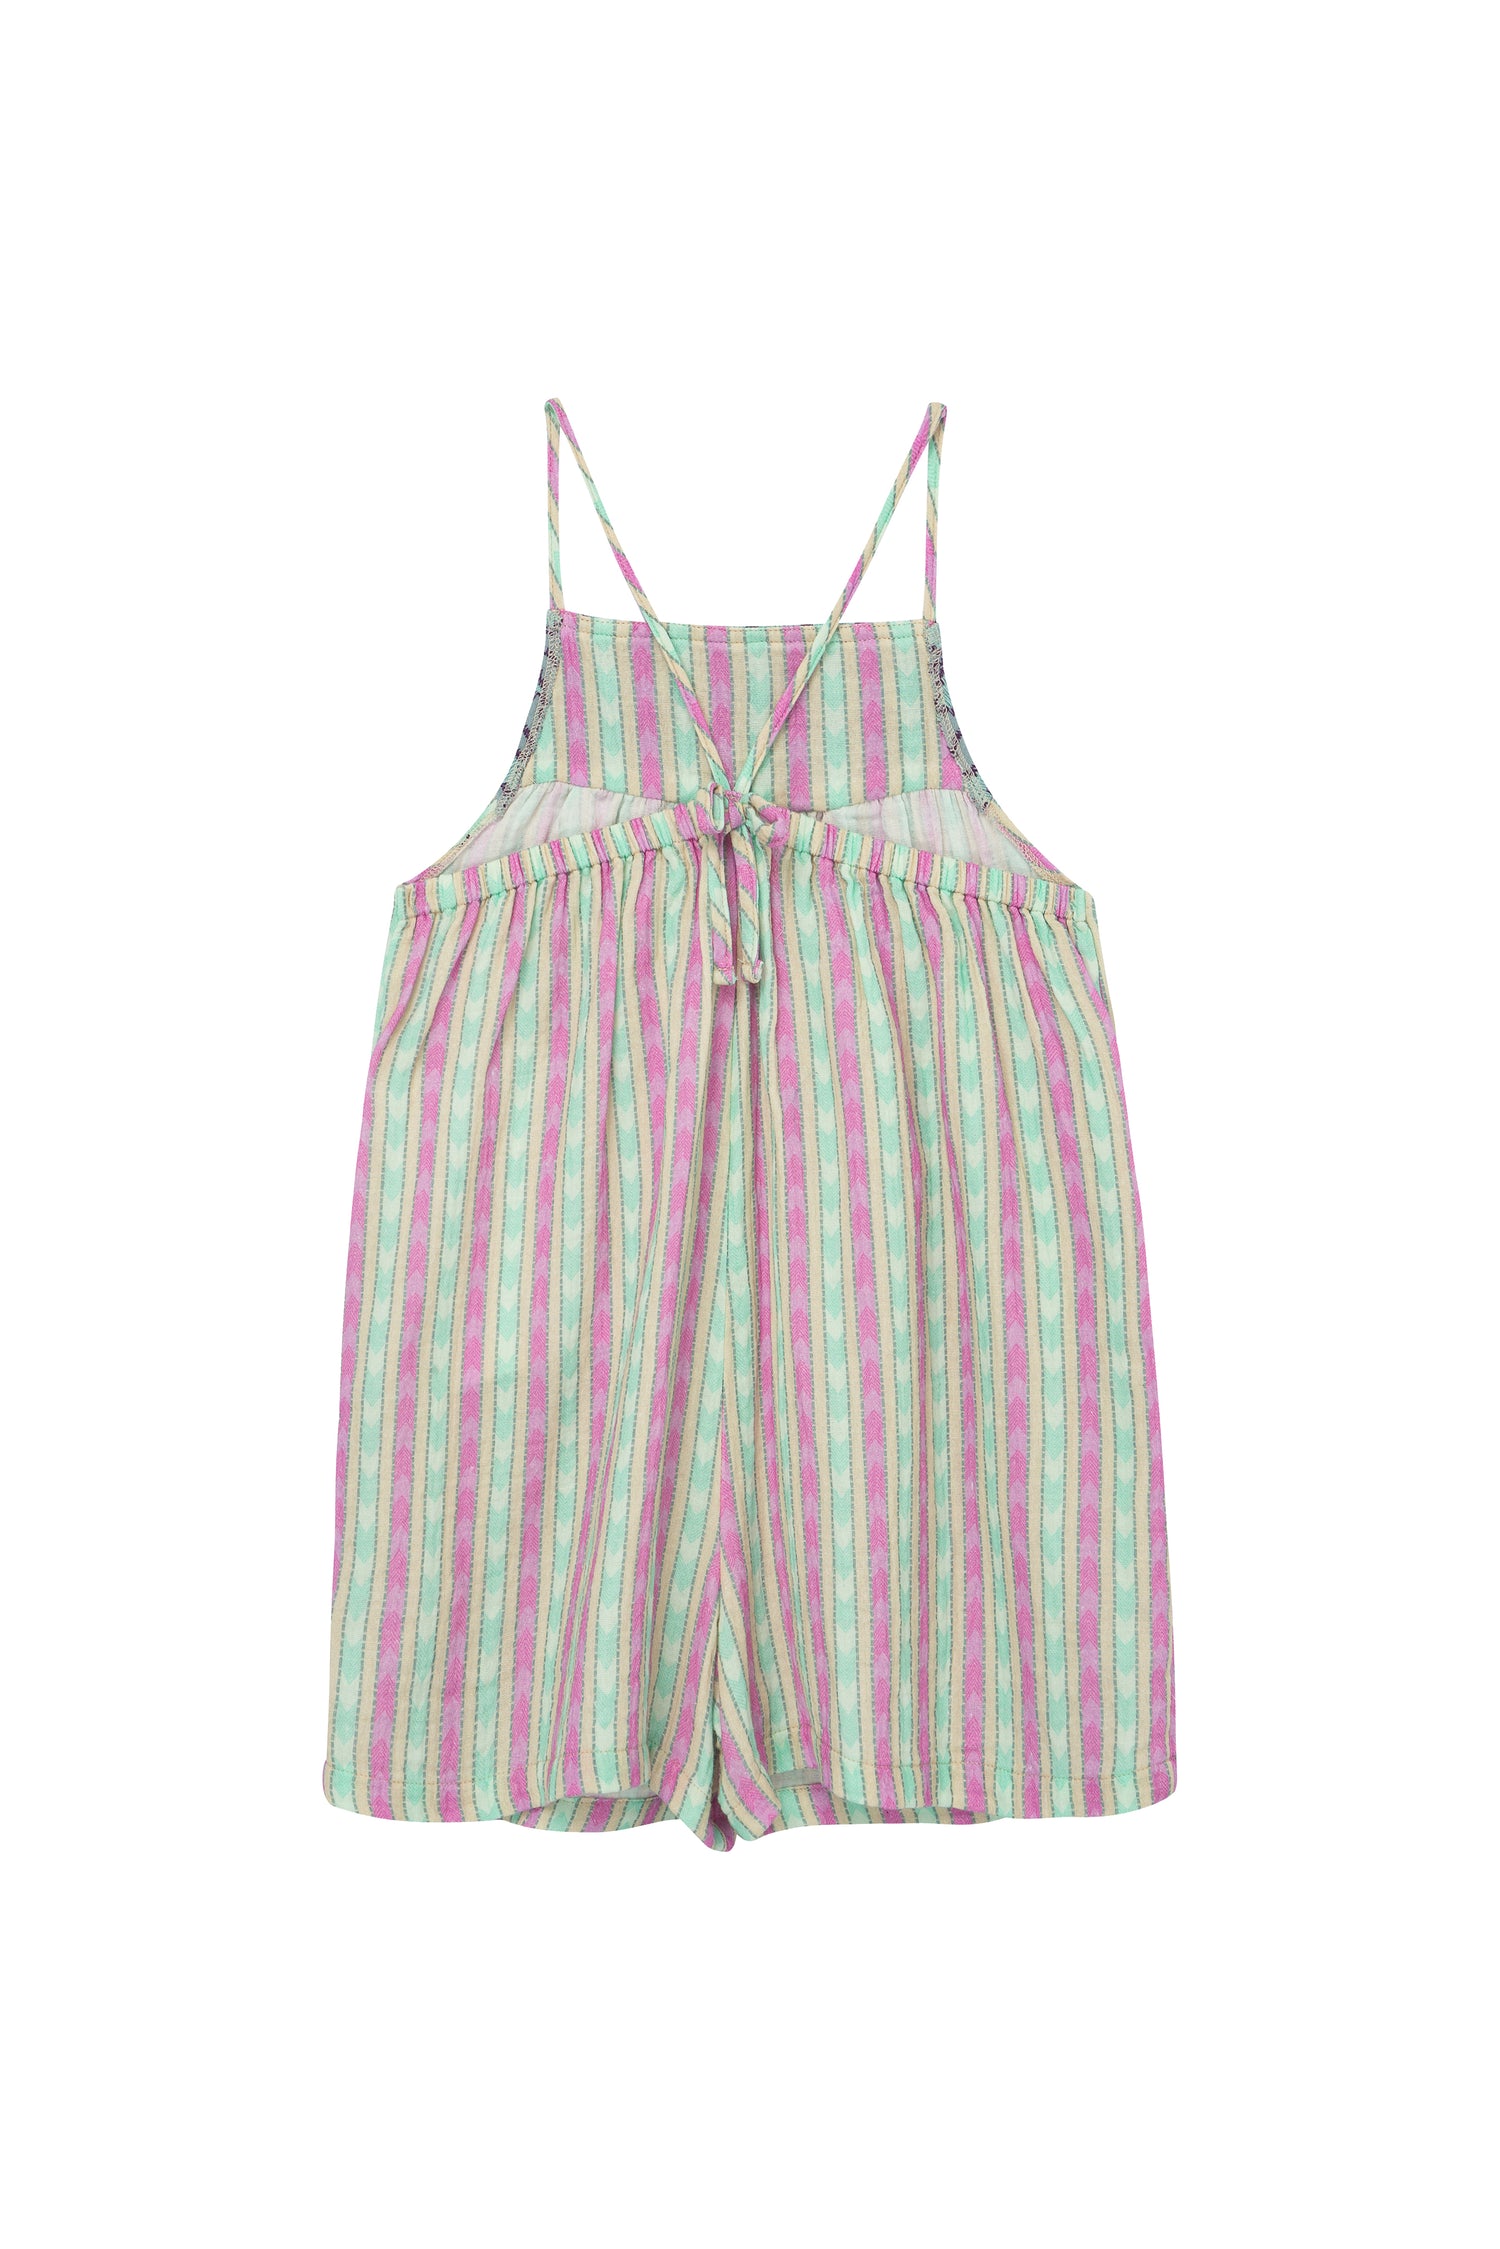 BACK OF GREEN AND PINK STRIPED GAUZE ROMPER